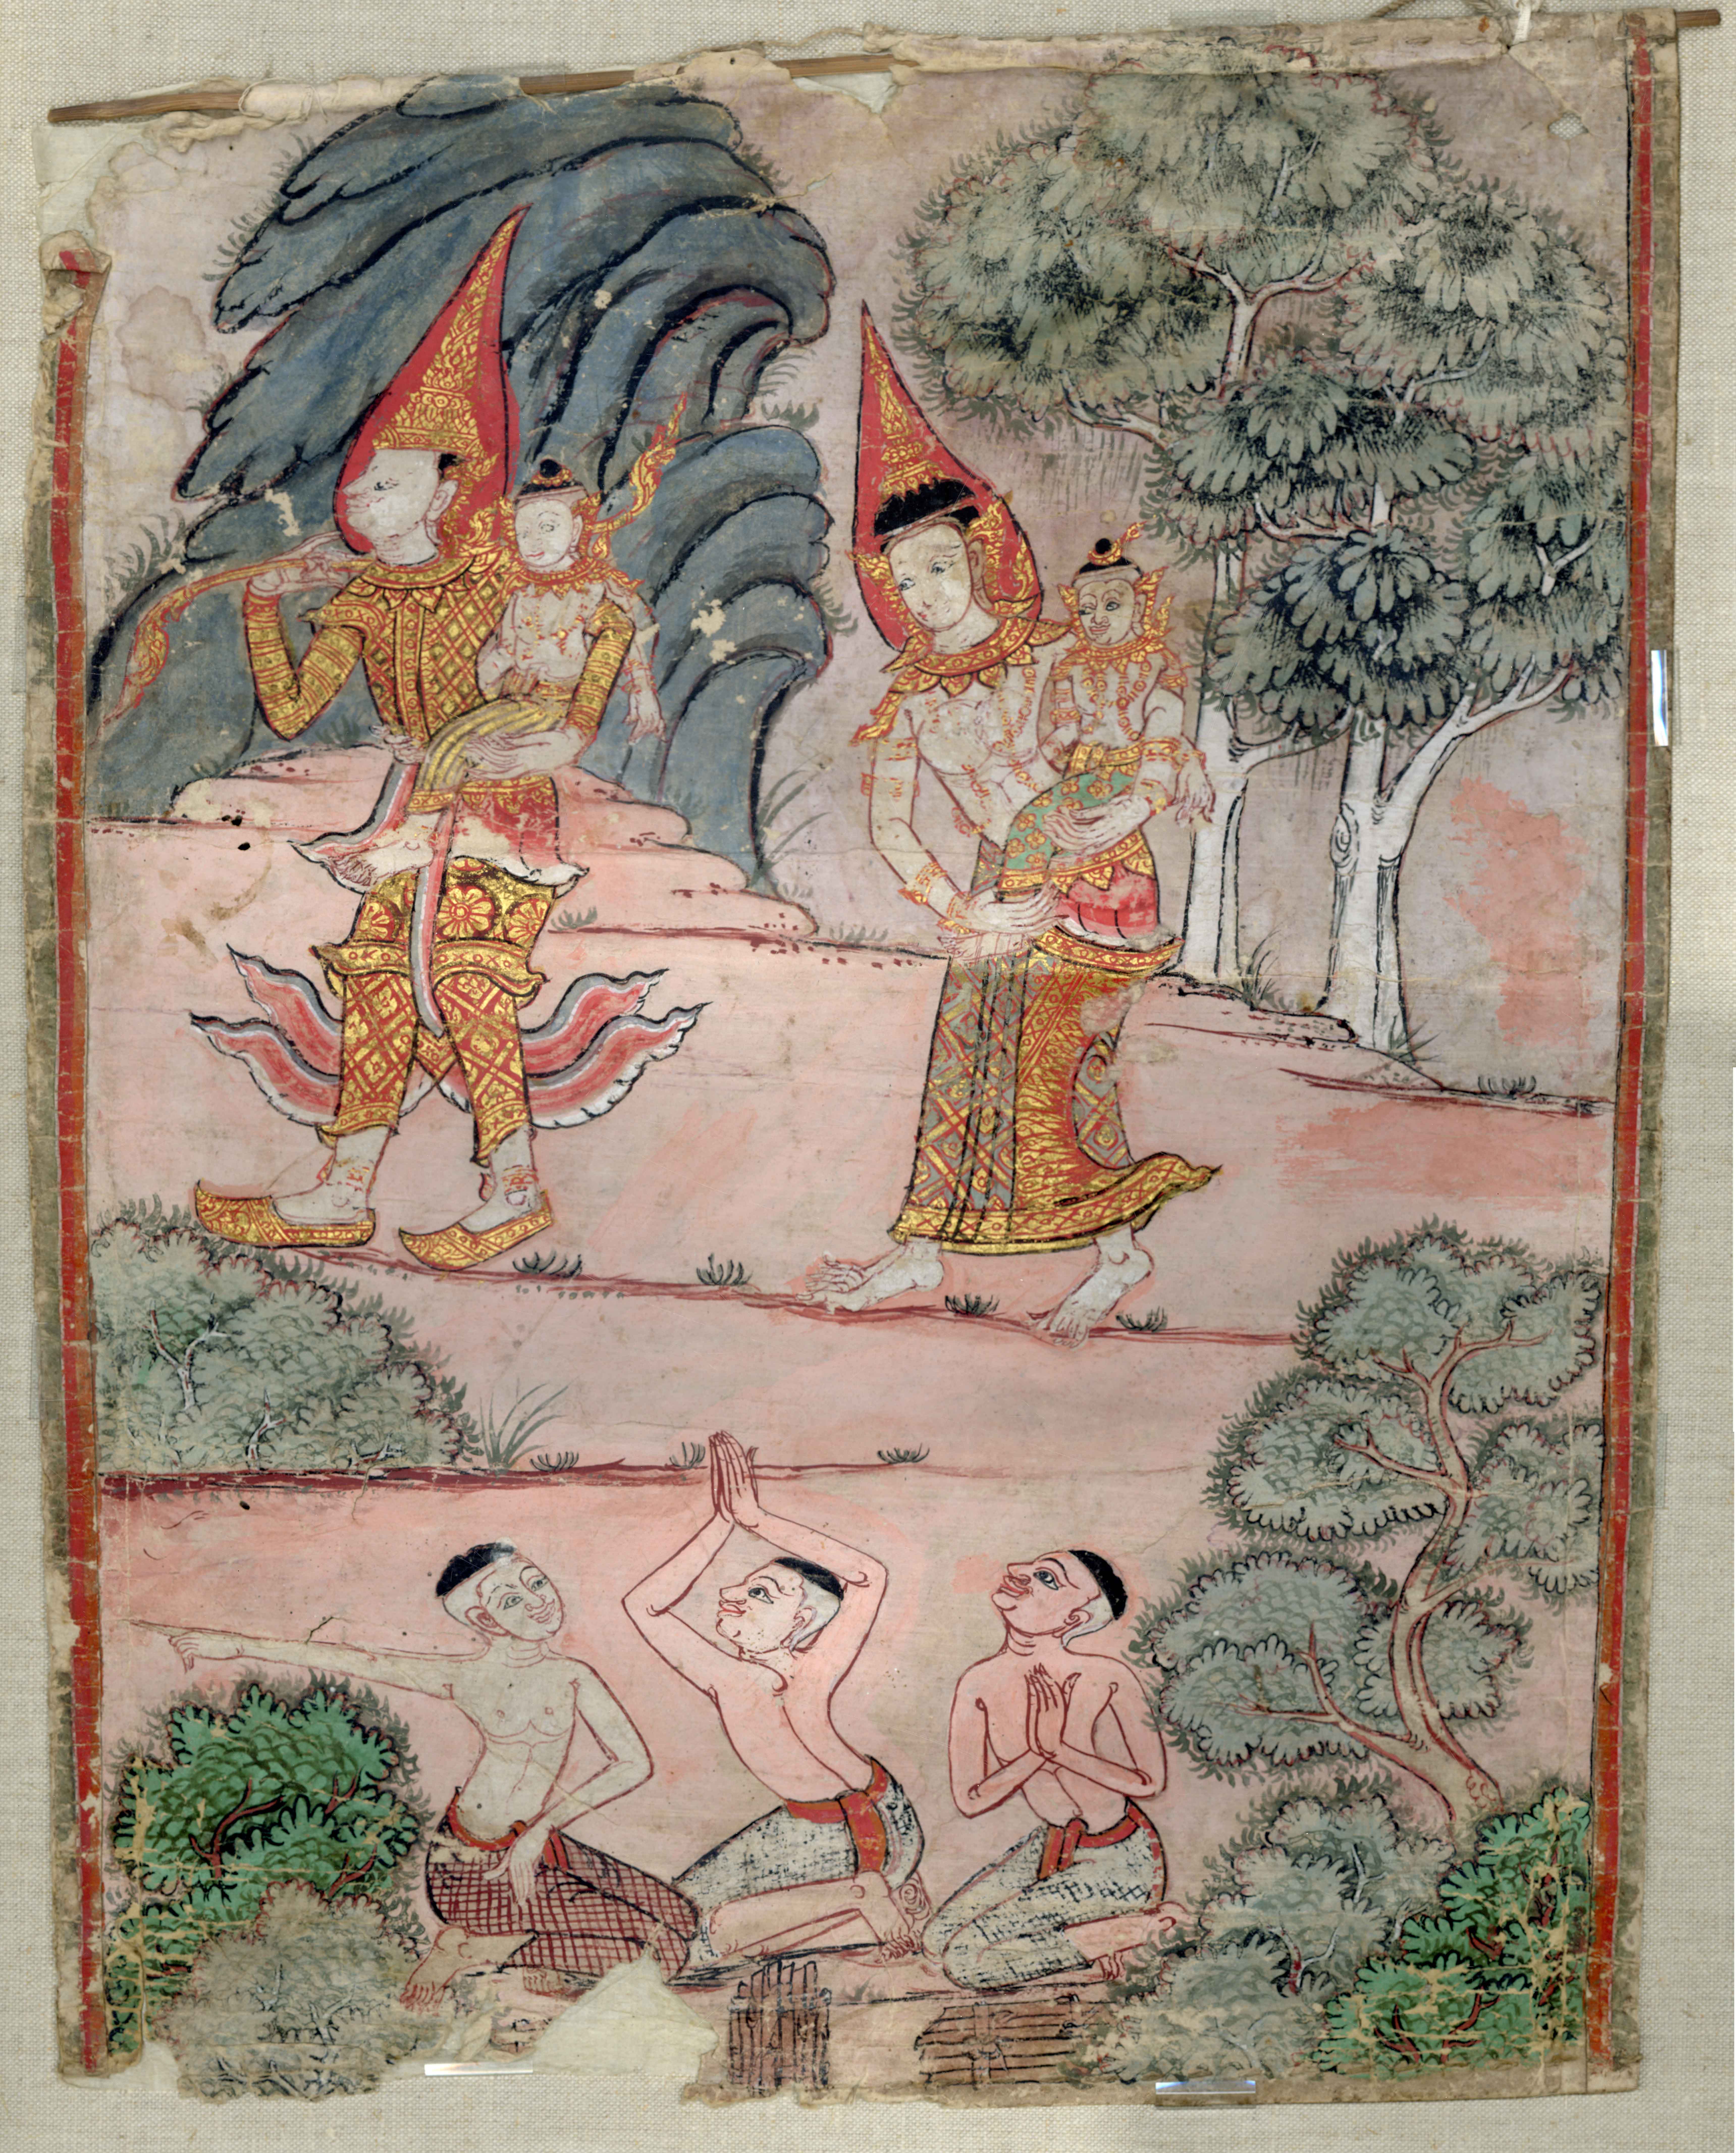 Adult figures carrying children wearing red and gold walk through a forest. There are three kneeling or praying figures in the foreground. 